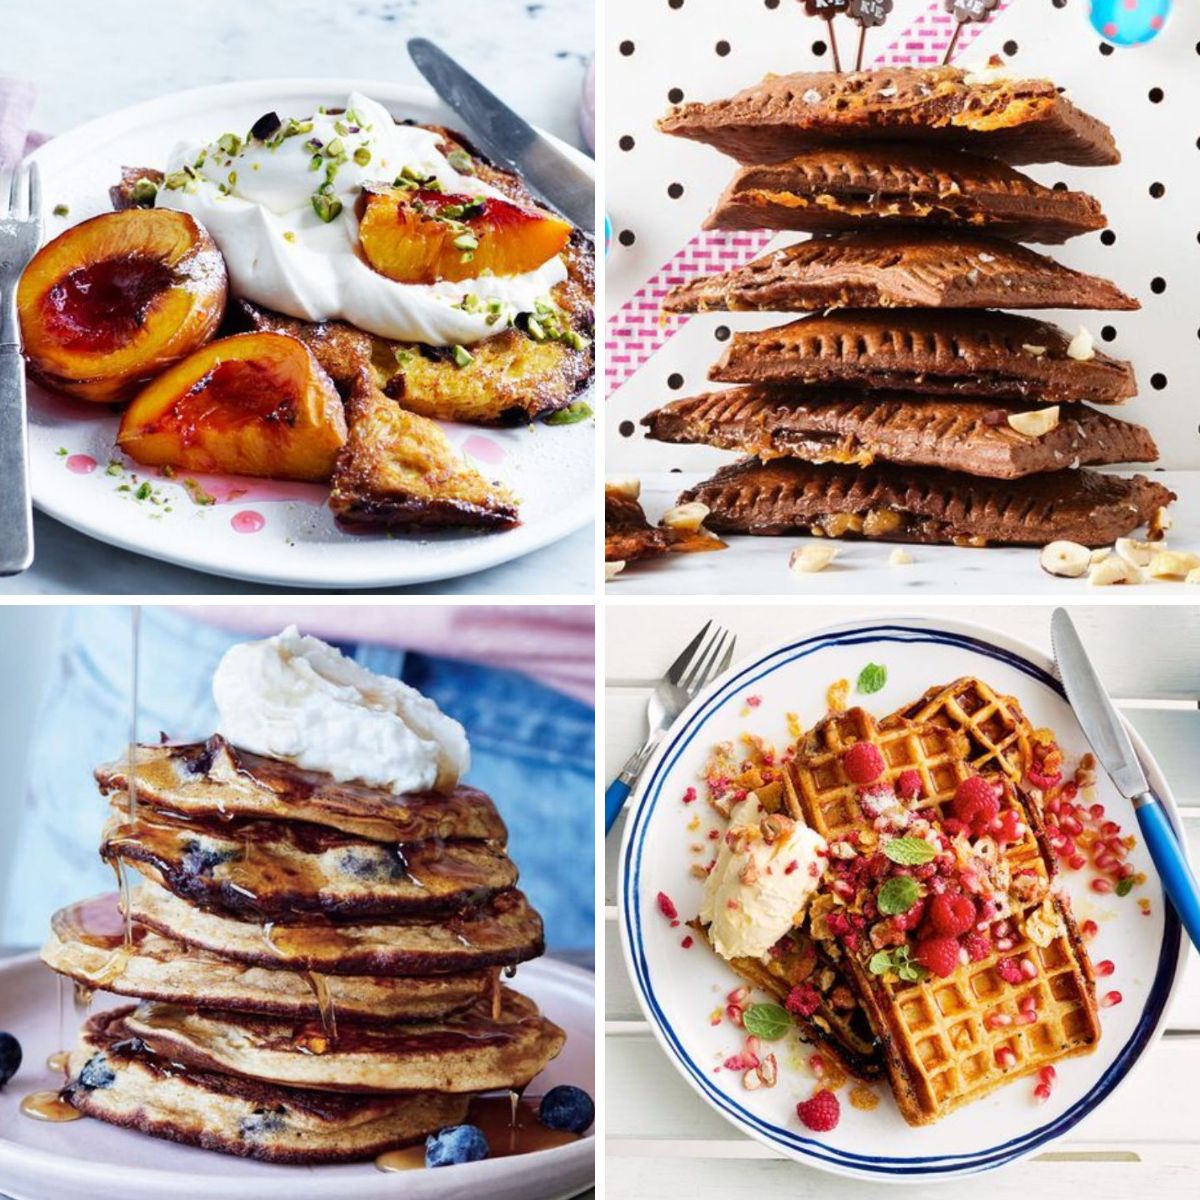 Four delicious sweet breakfasts.